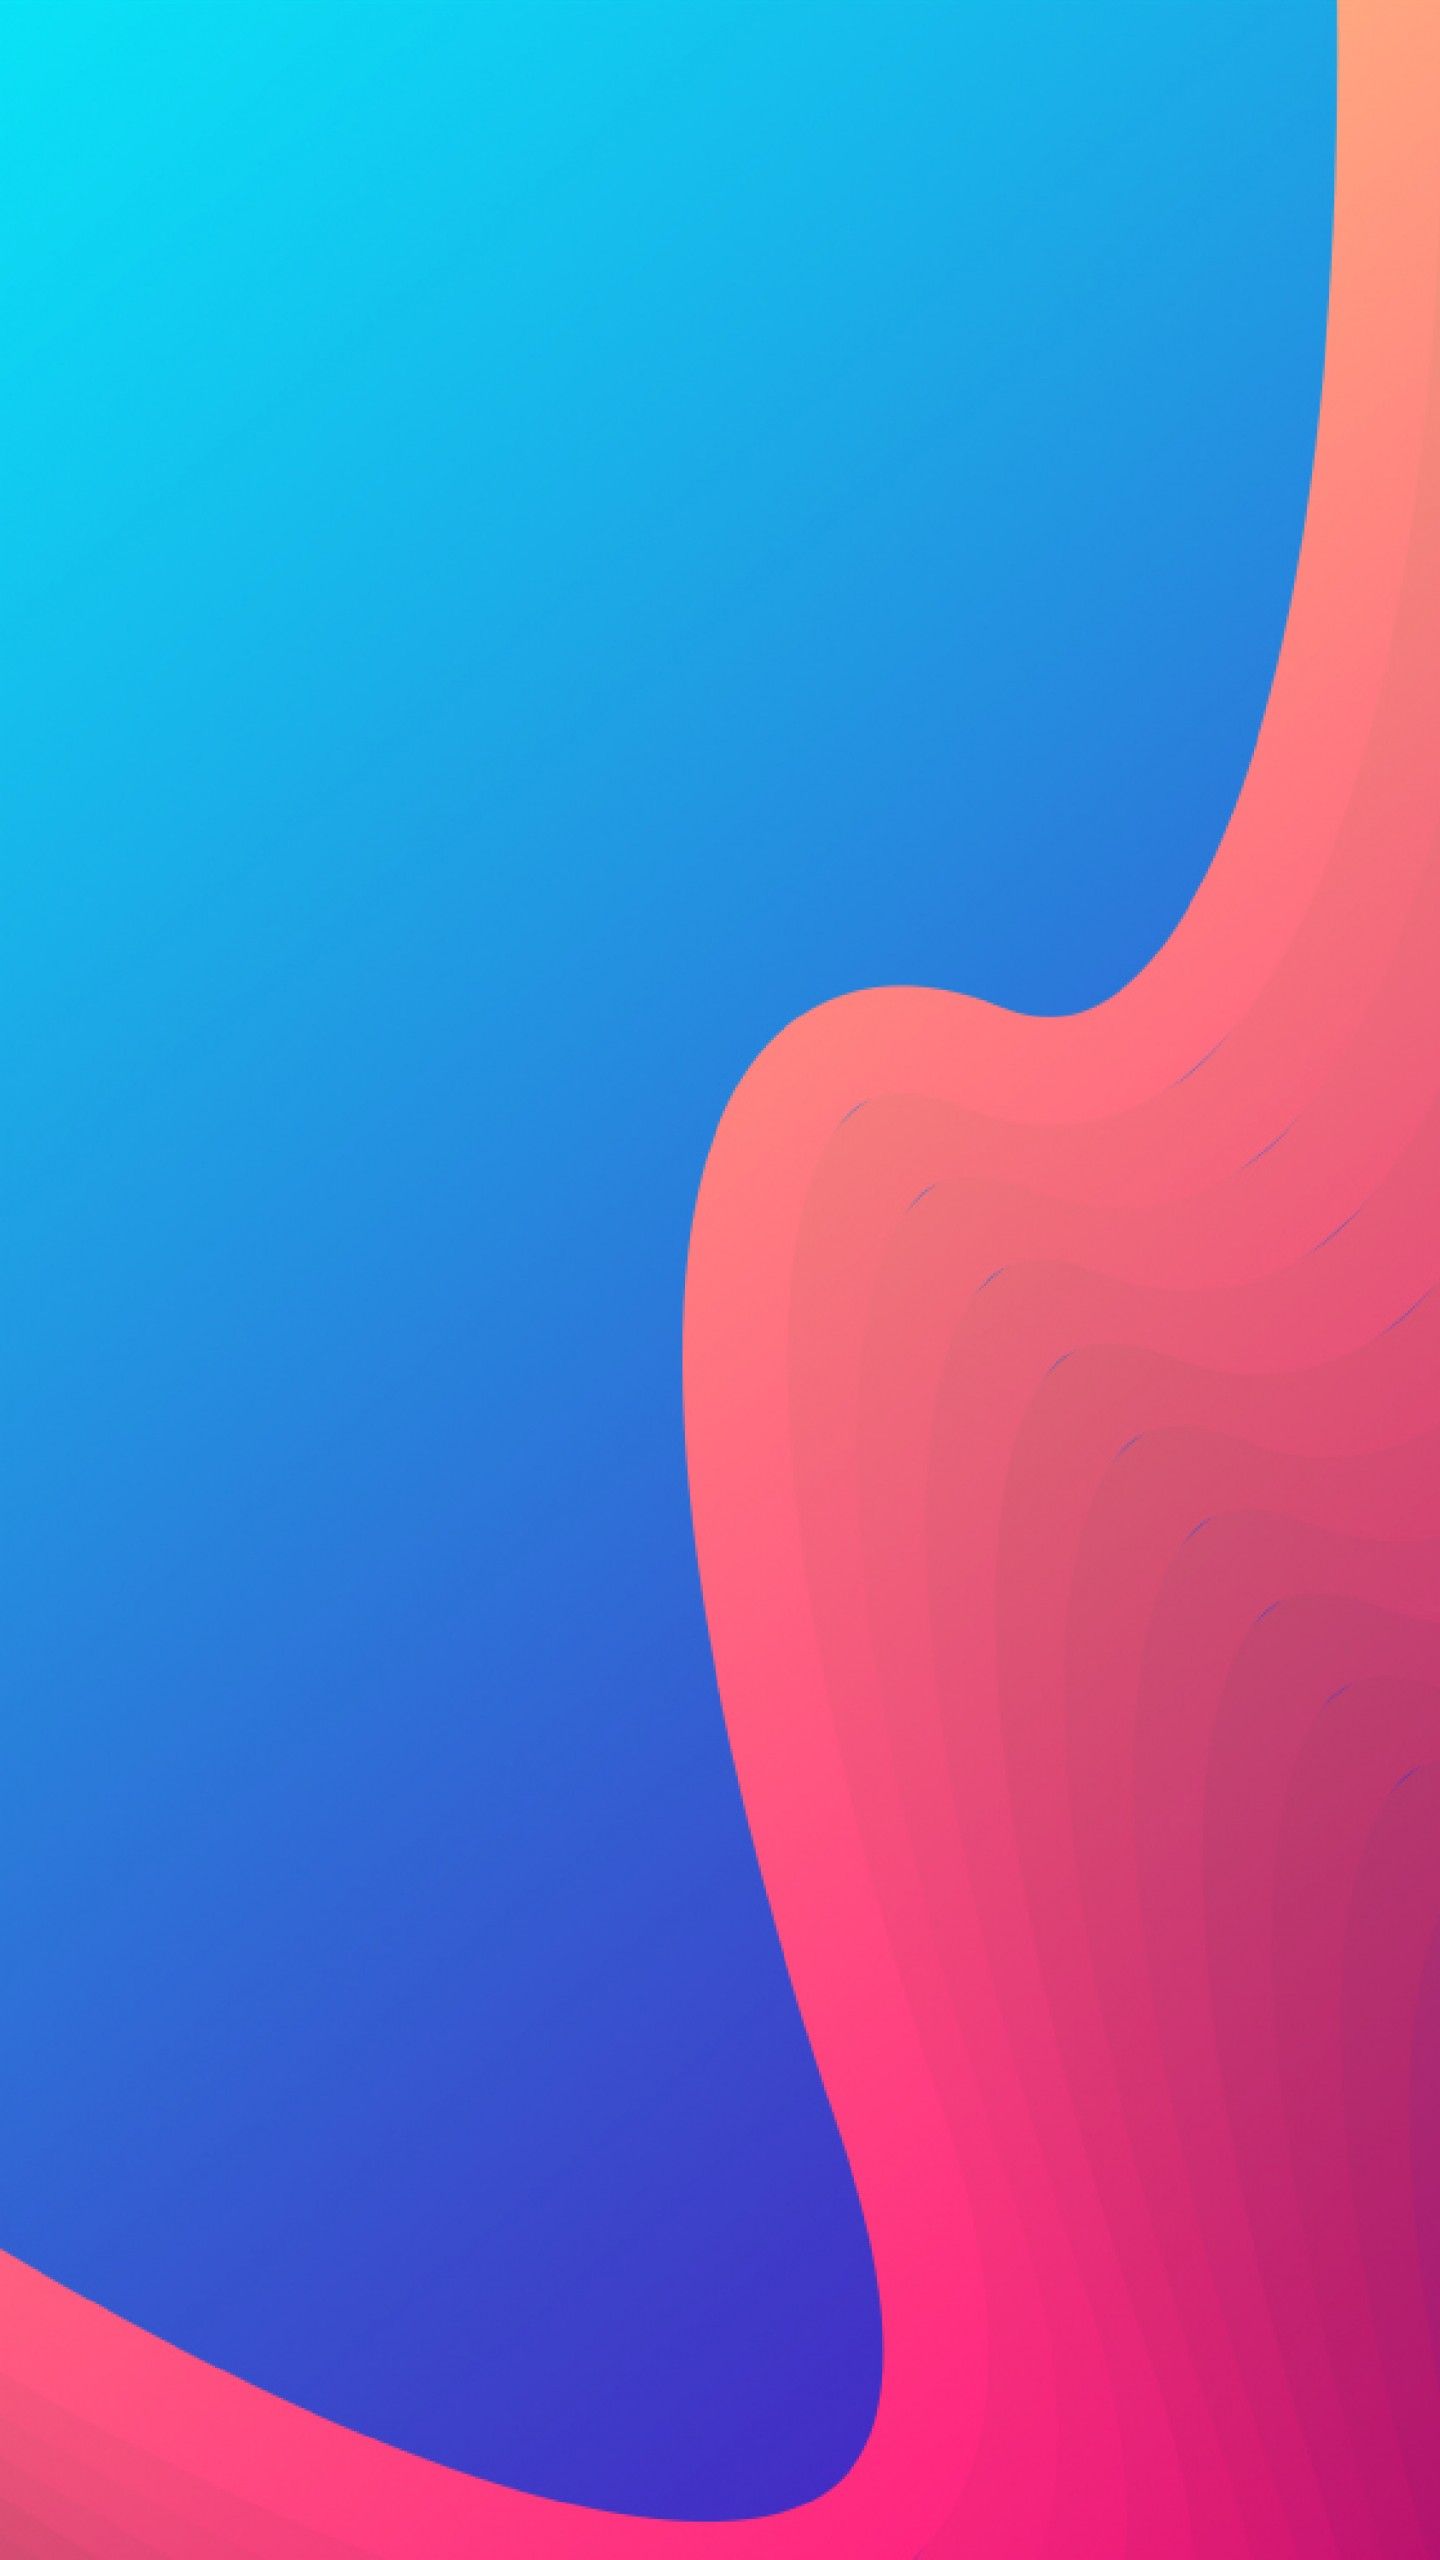 Wallpaper Gradient, Orange, Blue, 4K, 5K, Abstract,. Wallpaper for iPhone, Android, Mobile and Desktop